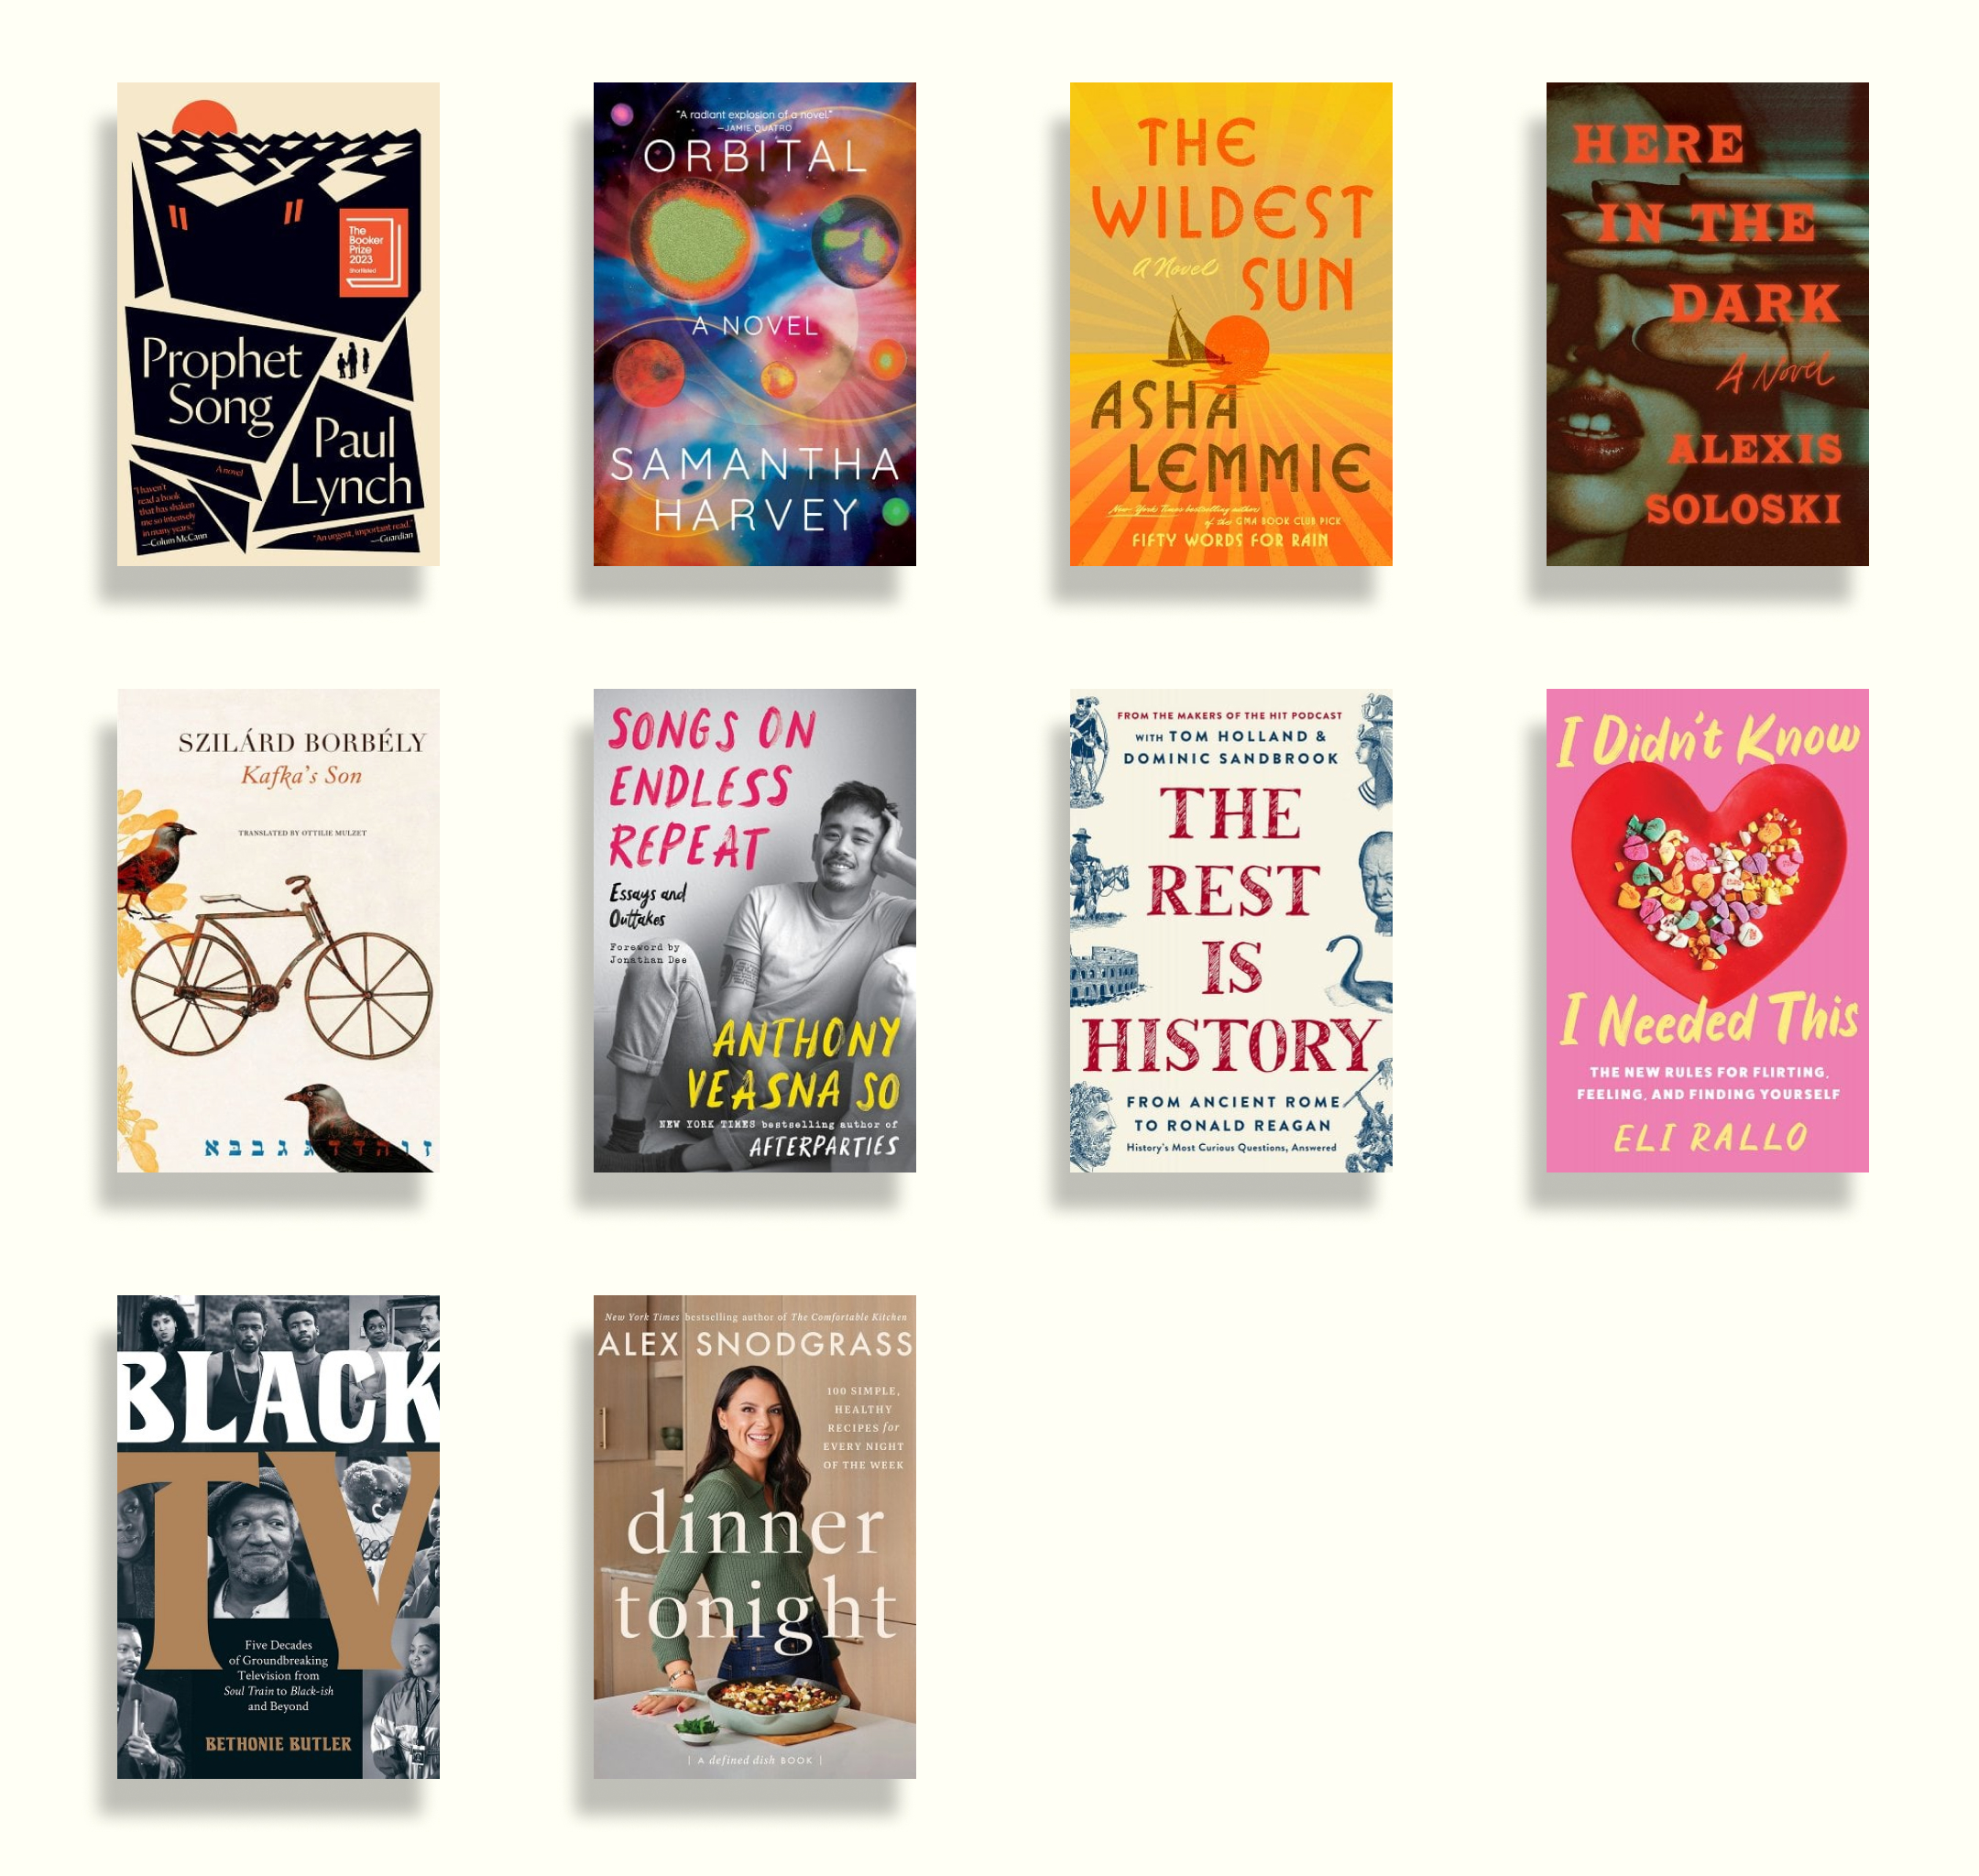 Article image for: Tertulia Staff Picks: 10 Books Coming in December That We Can't Wait to Read